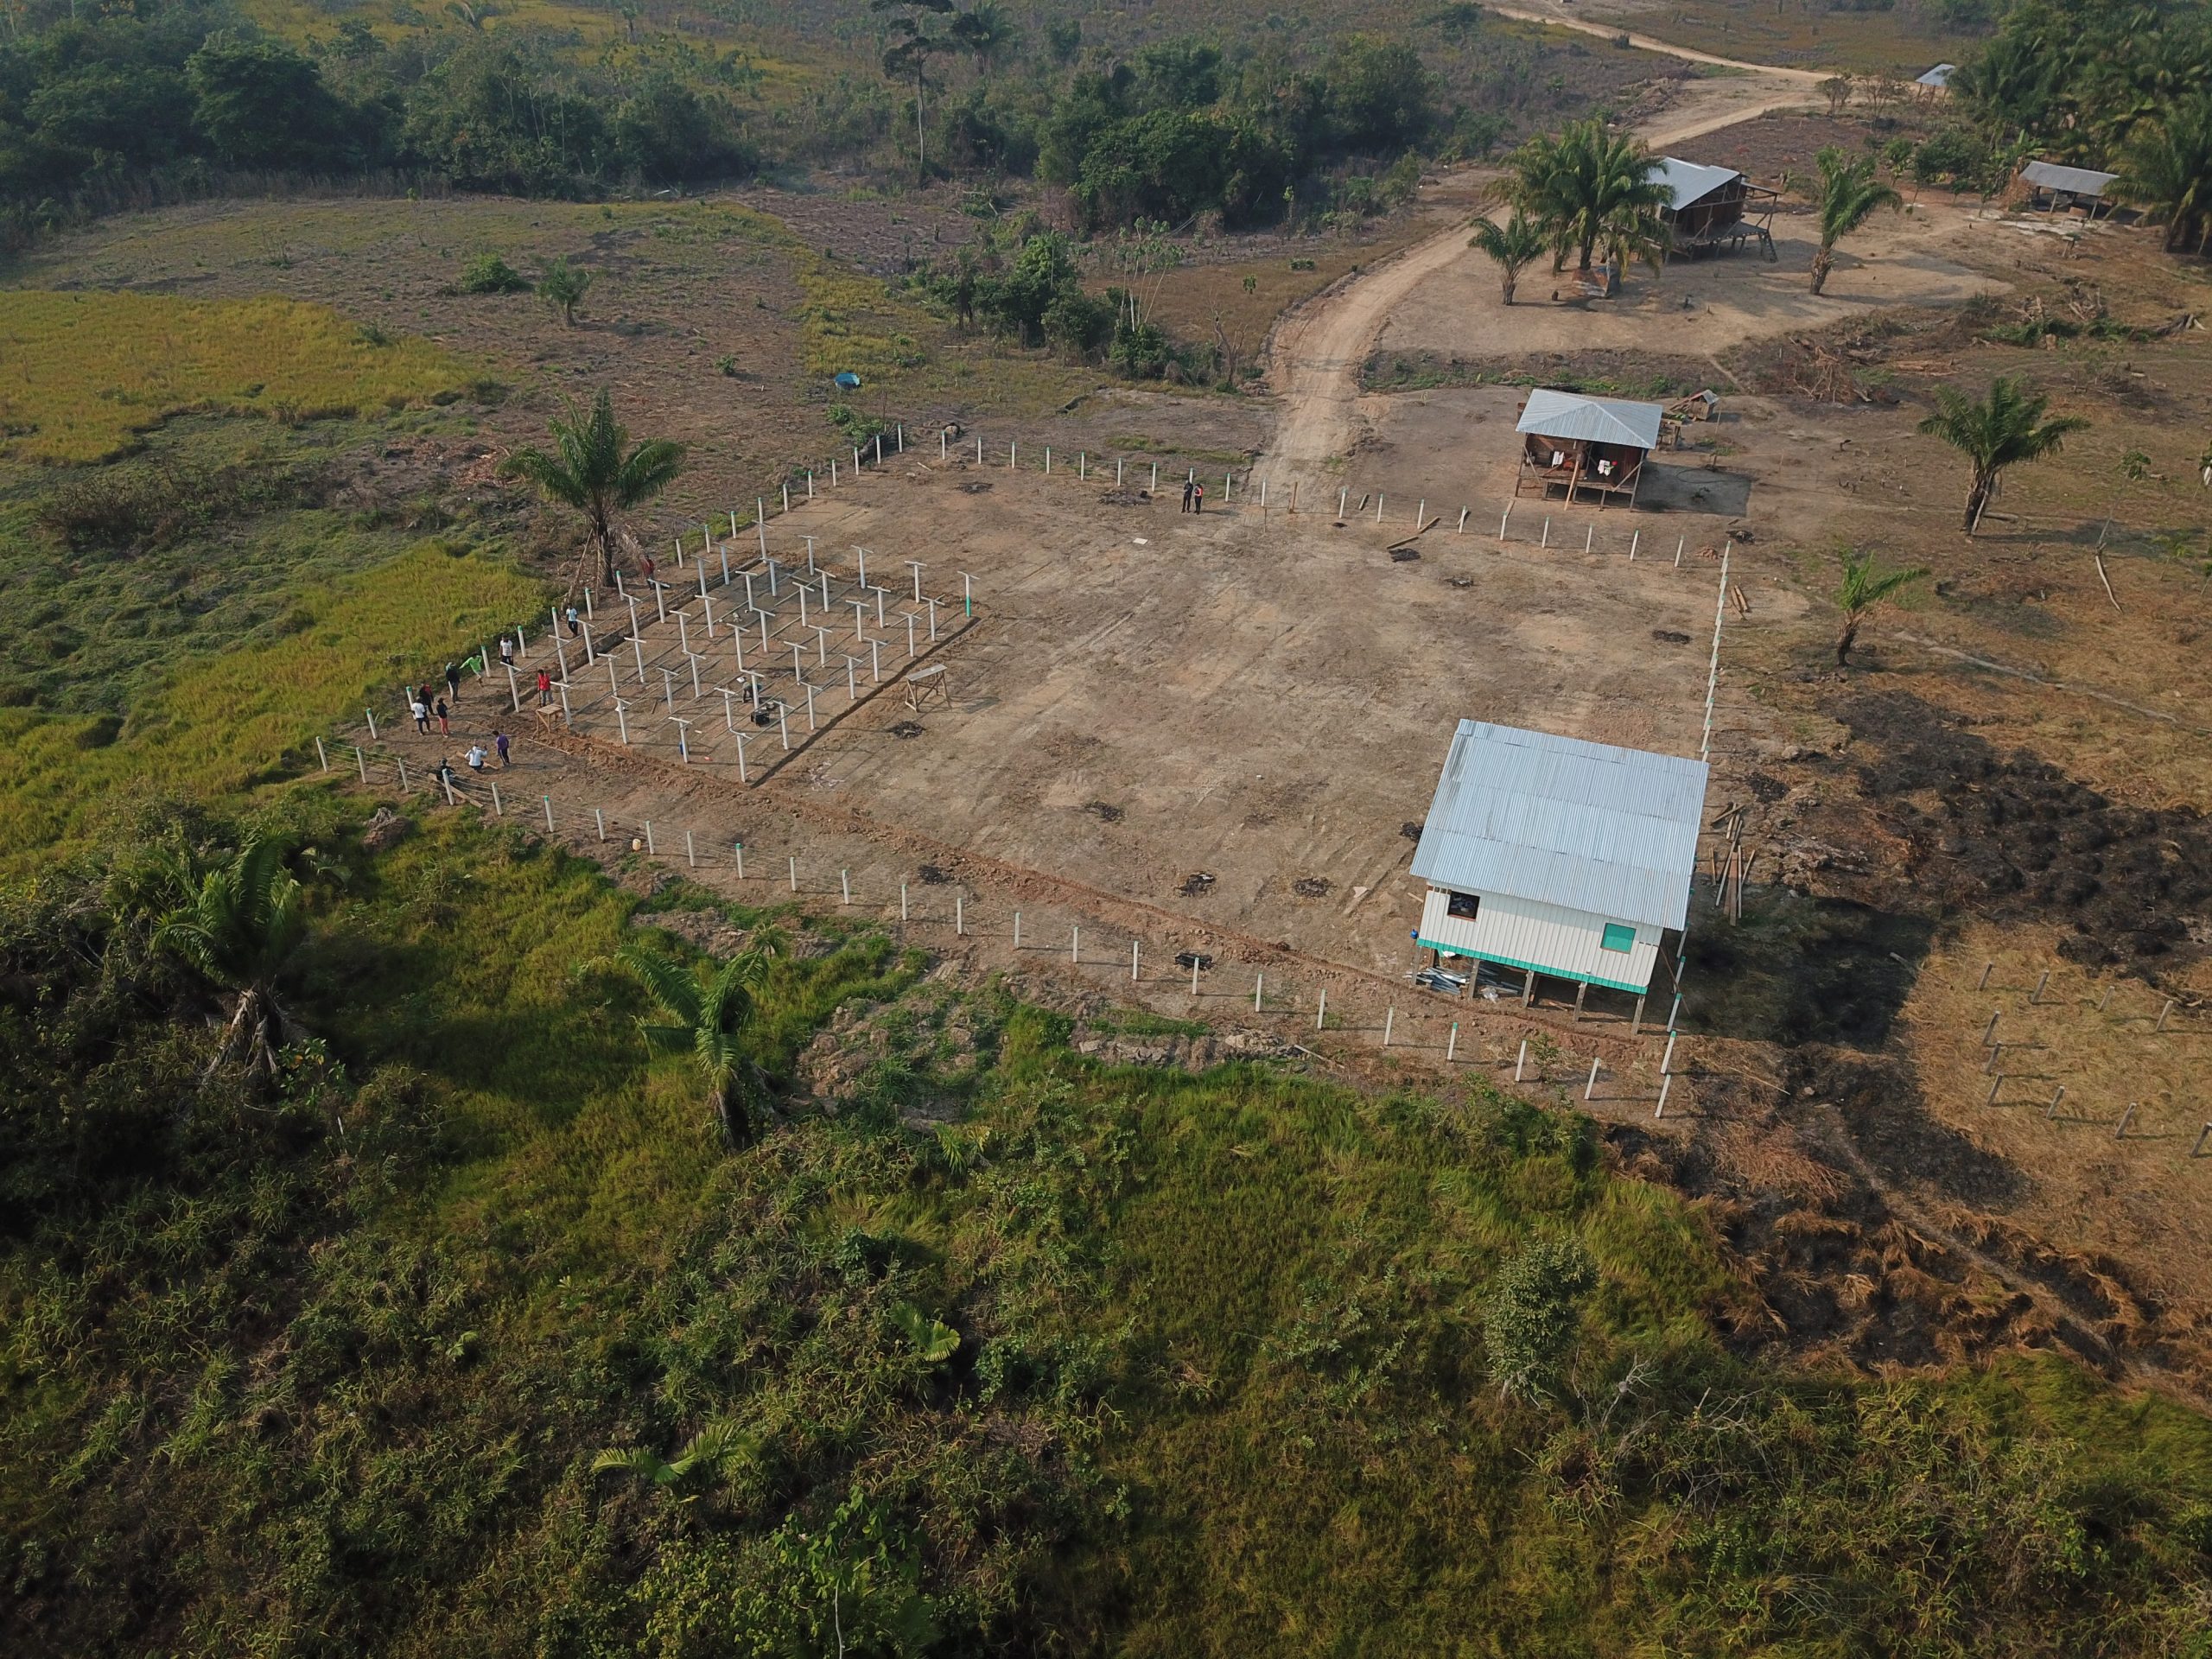 An aerial view of a small-scale solar plant under construction